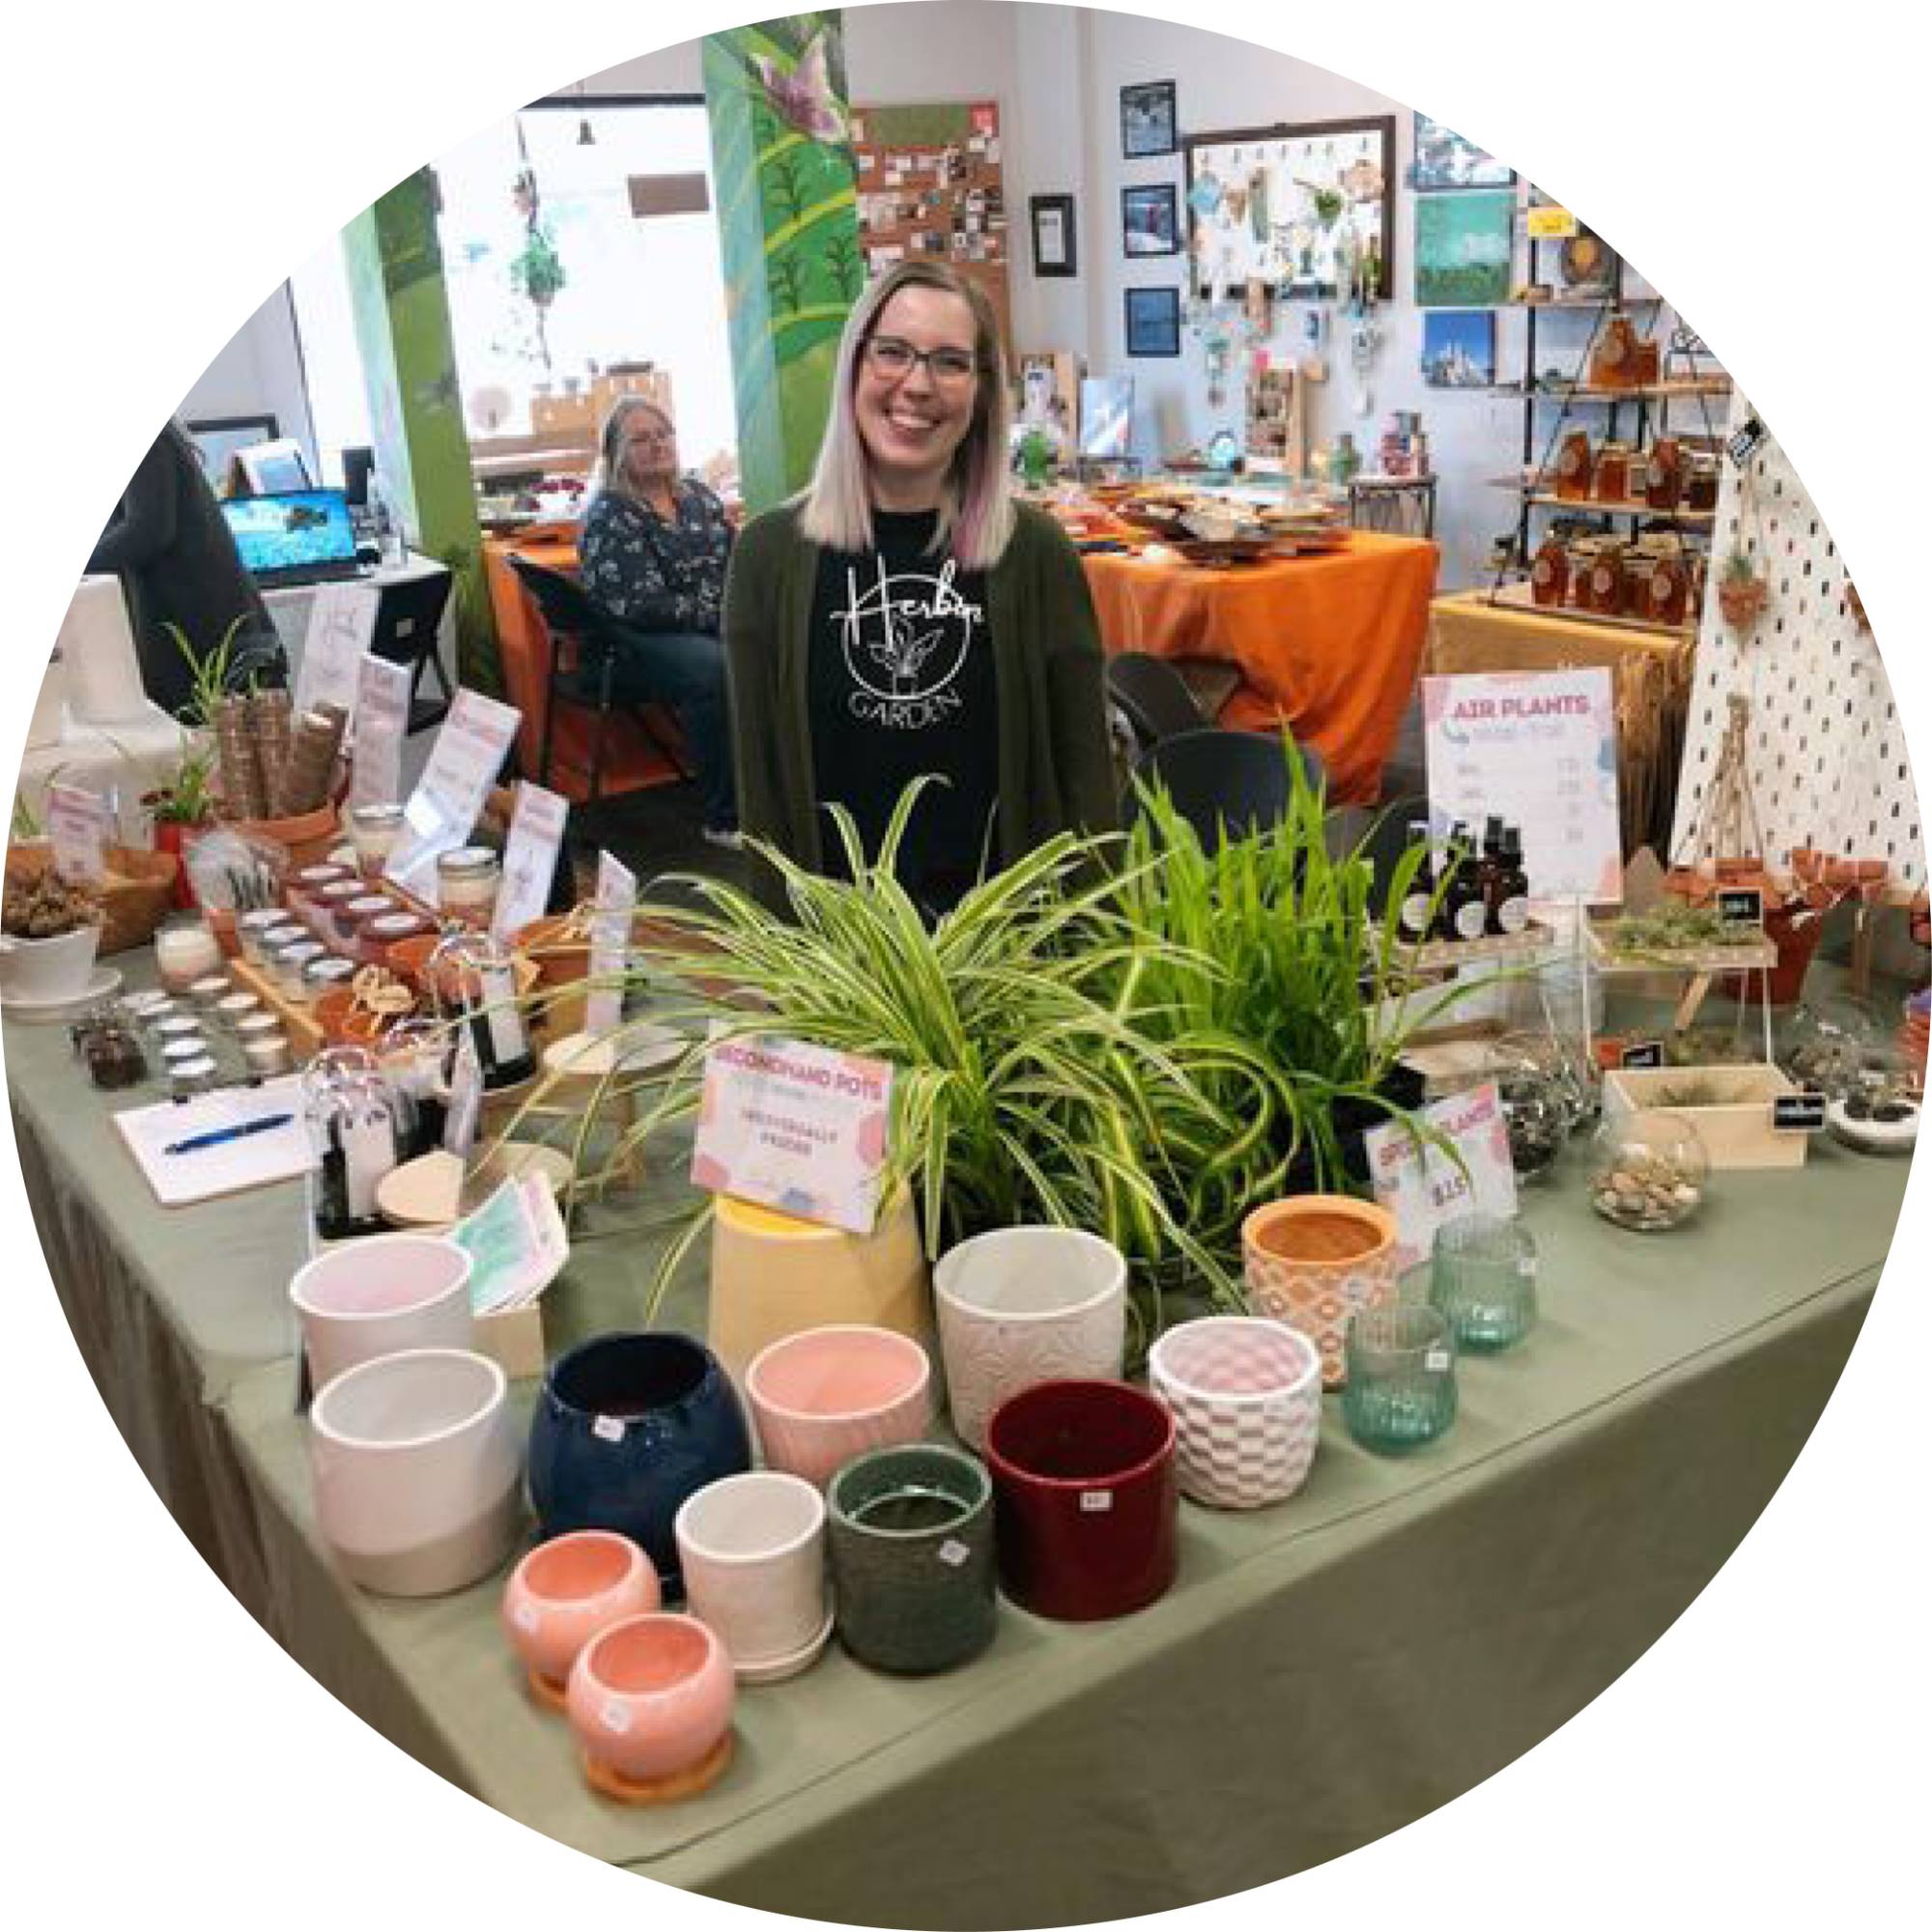 Owner of Herbin Garden standing behind their booth of assorted plants and ceramic pots